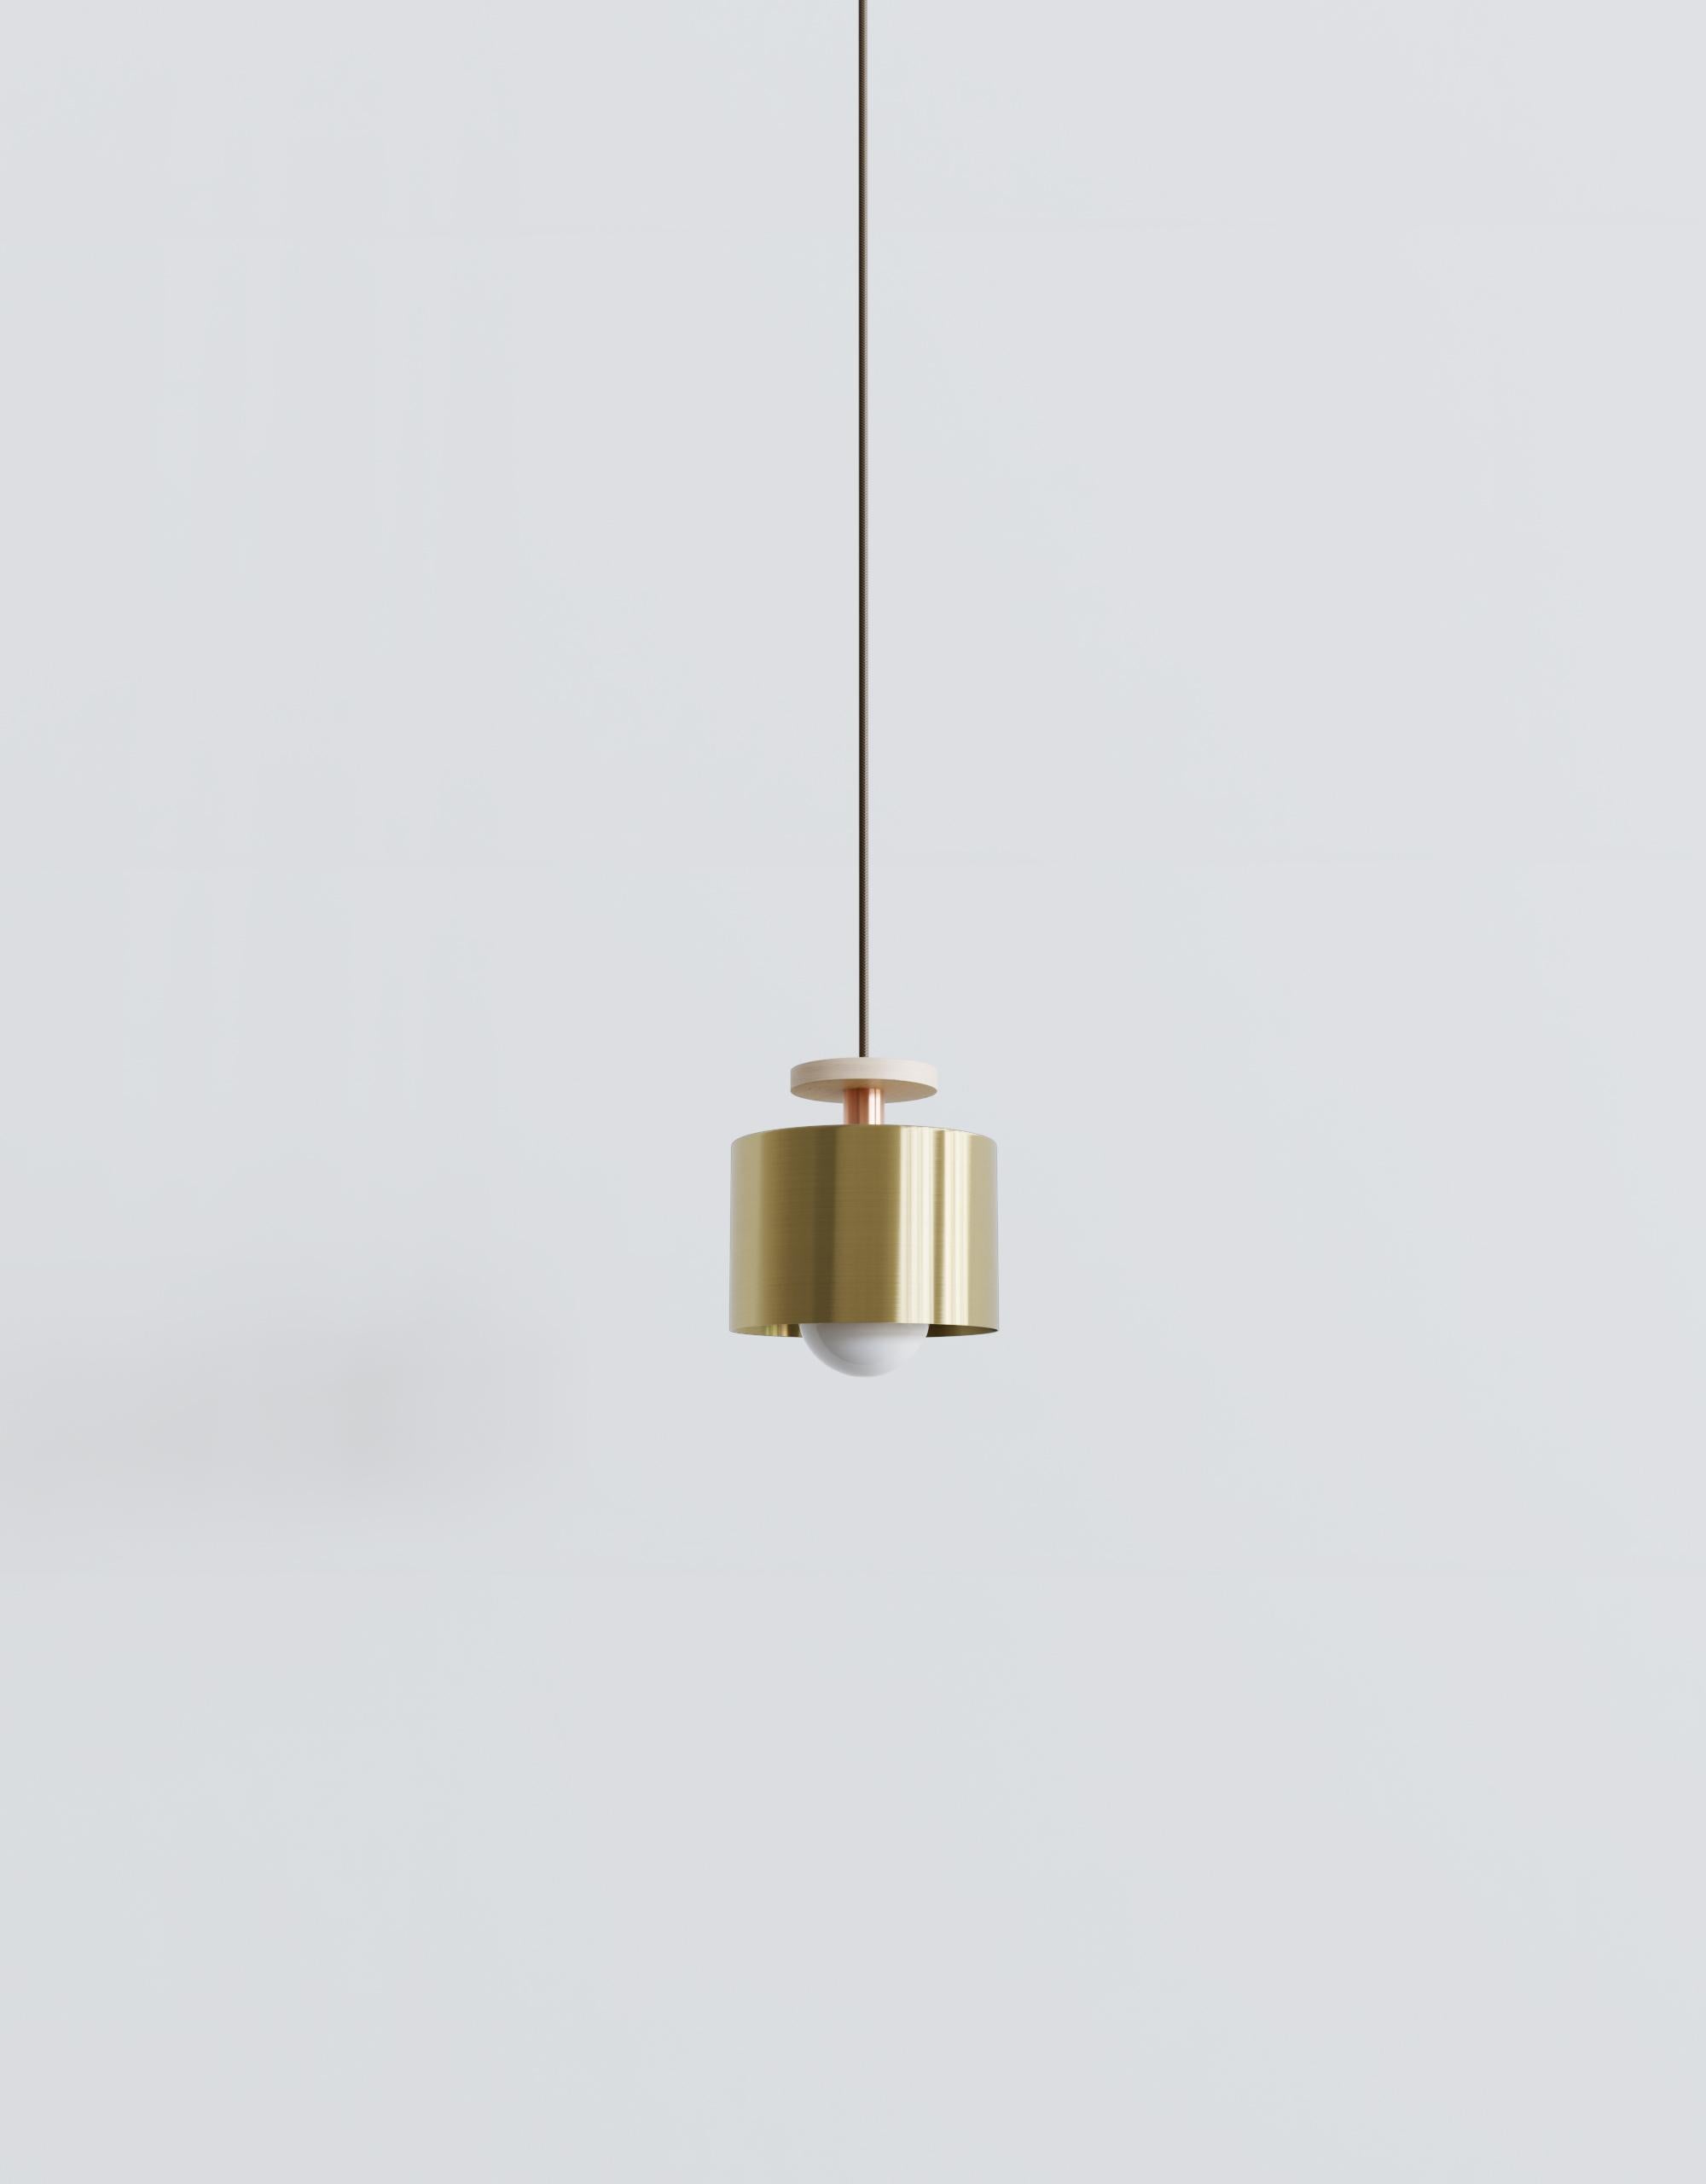 Spun Pendant in Polished Brass with Adjustable Drop light fixture In New Condition For Sale In Brooklyn, NY